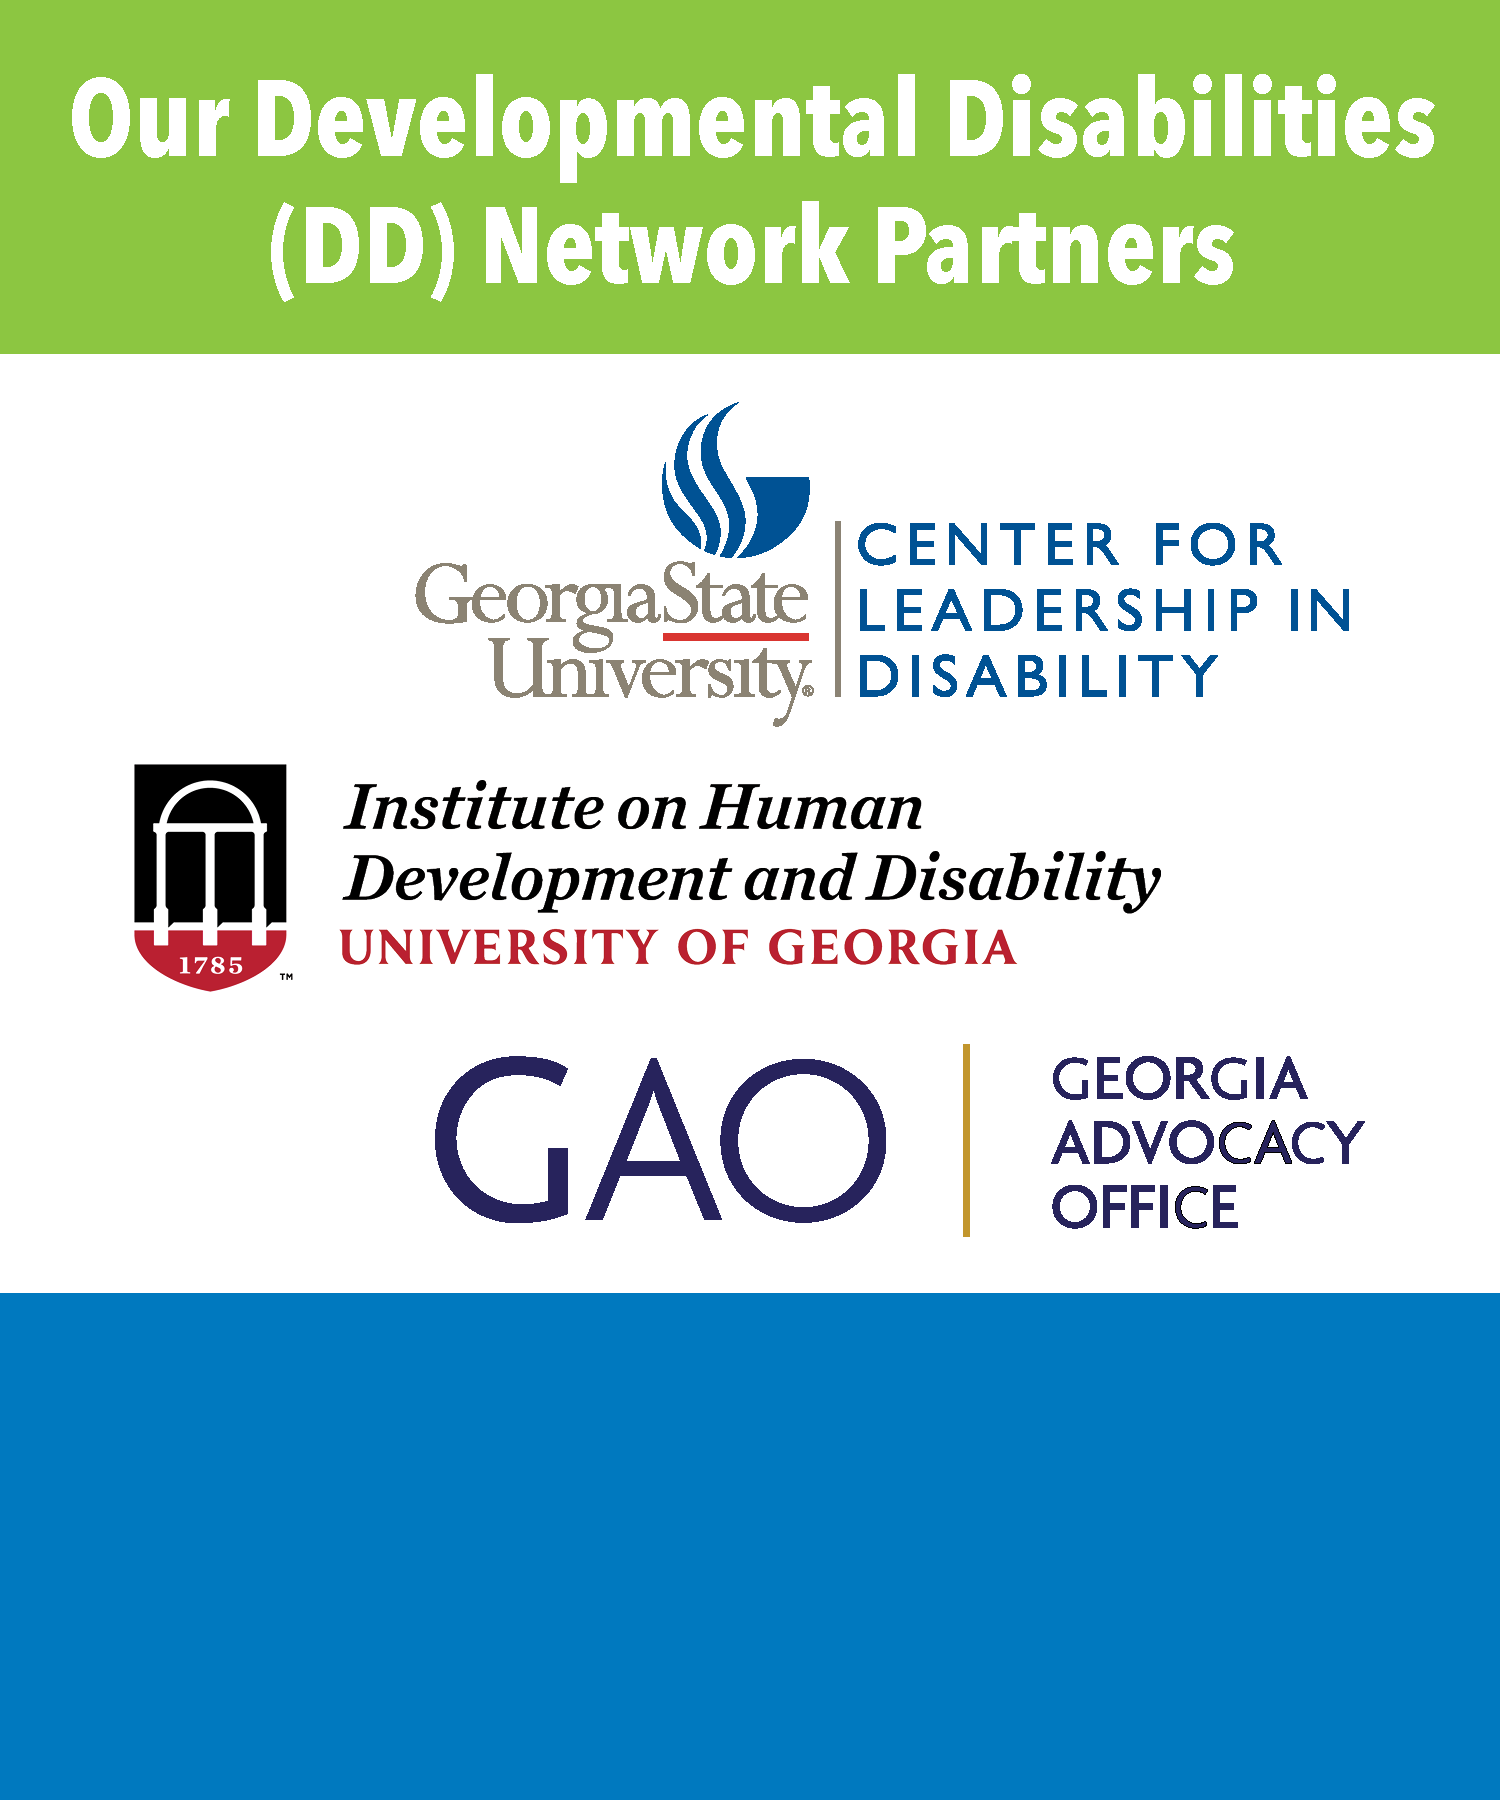 The DD Network consists of three partners in each state and territory authorized under the Developmental Disabilities Assistance and Bill of Rights Act of 2000 and administered by the Administration on Developmental Disabilities: University Centers for Excellence in Developmental Disabilities, State Developmental Disabilities Councils, and State Protection and Advocacy Systems.